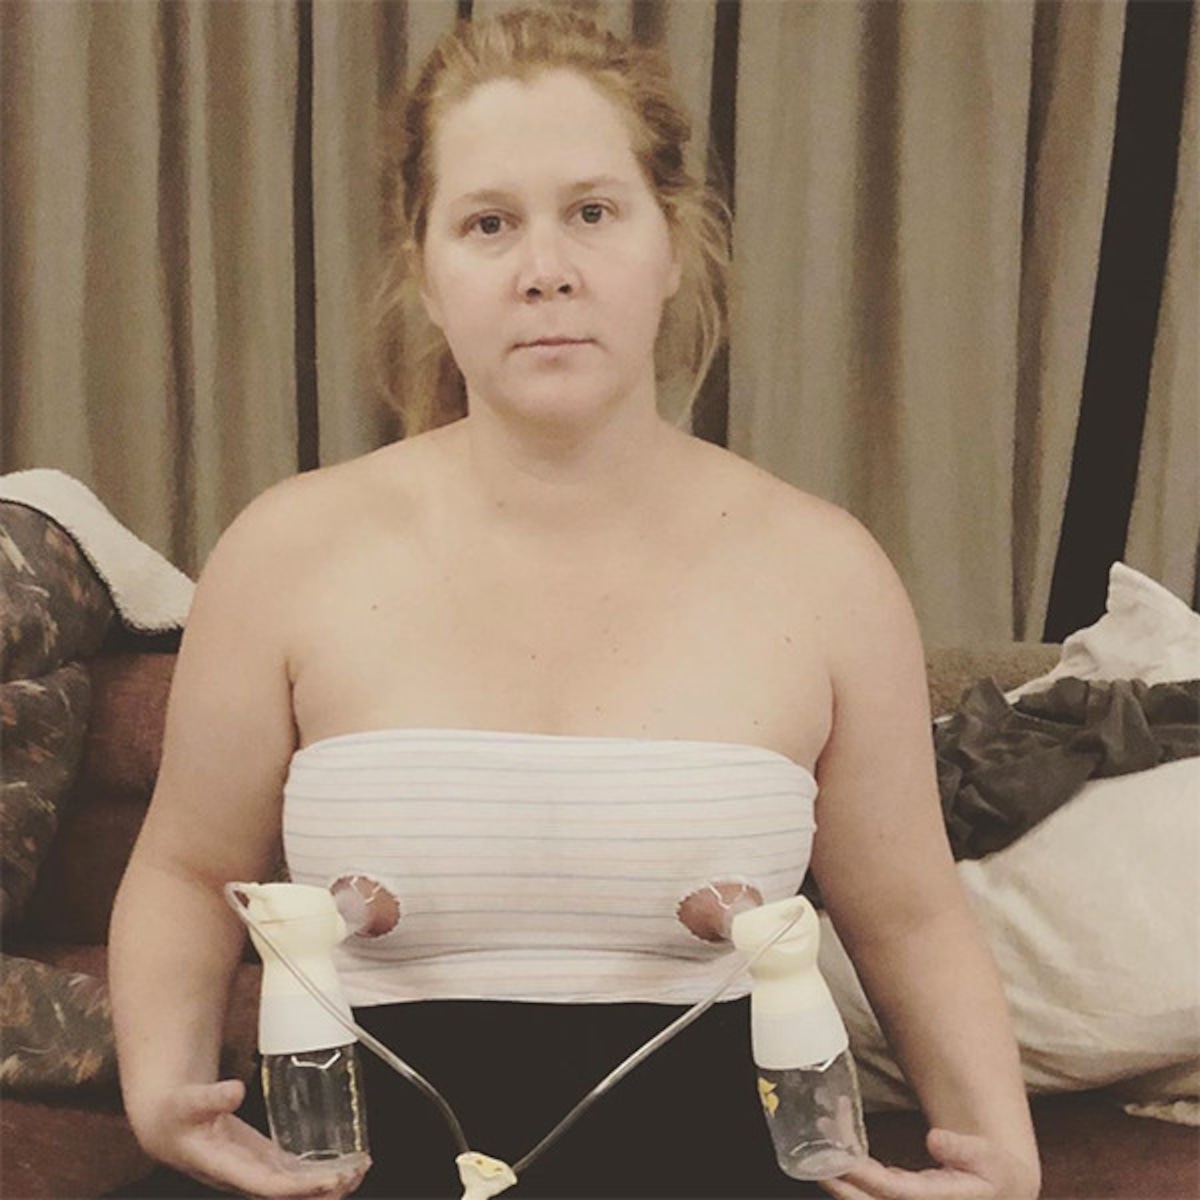 Amy Schumer Shares Photo of Her Pumping Breast Milk for Newborn Son - E! Online